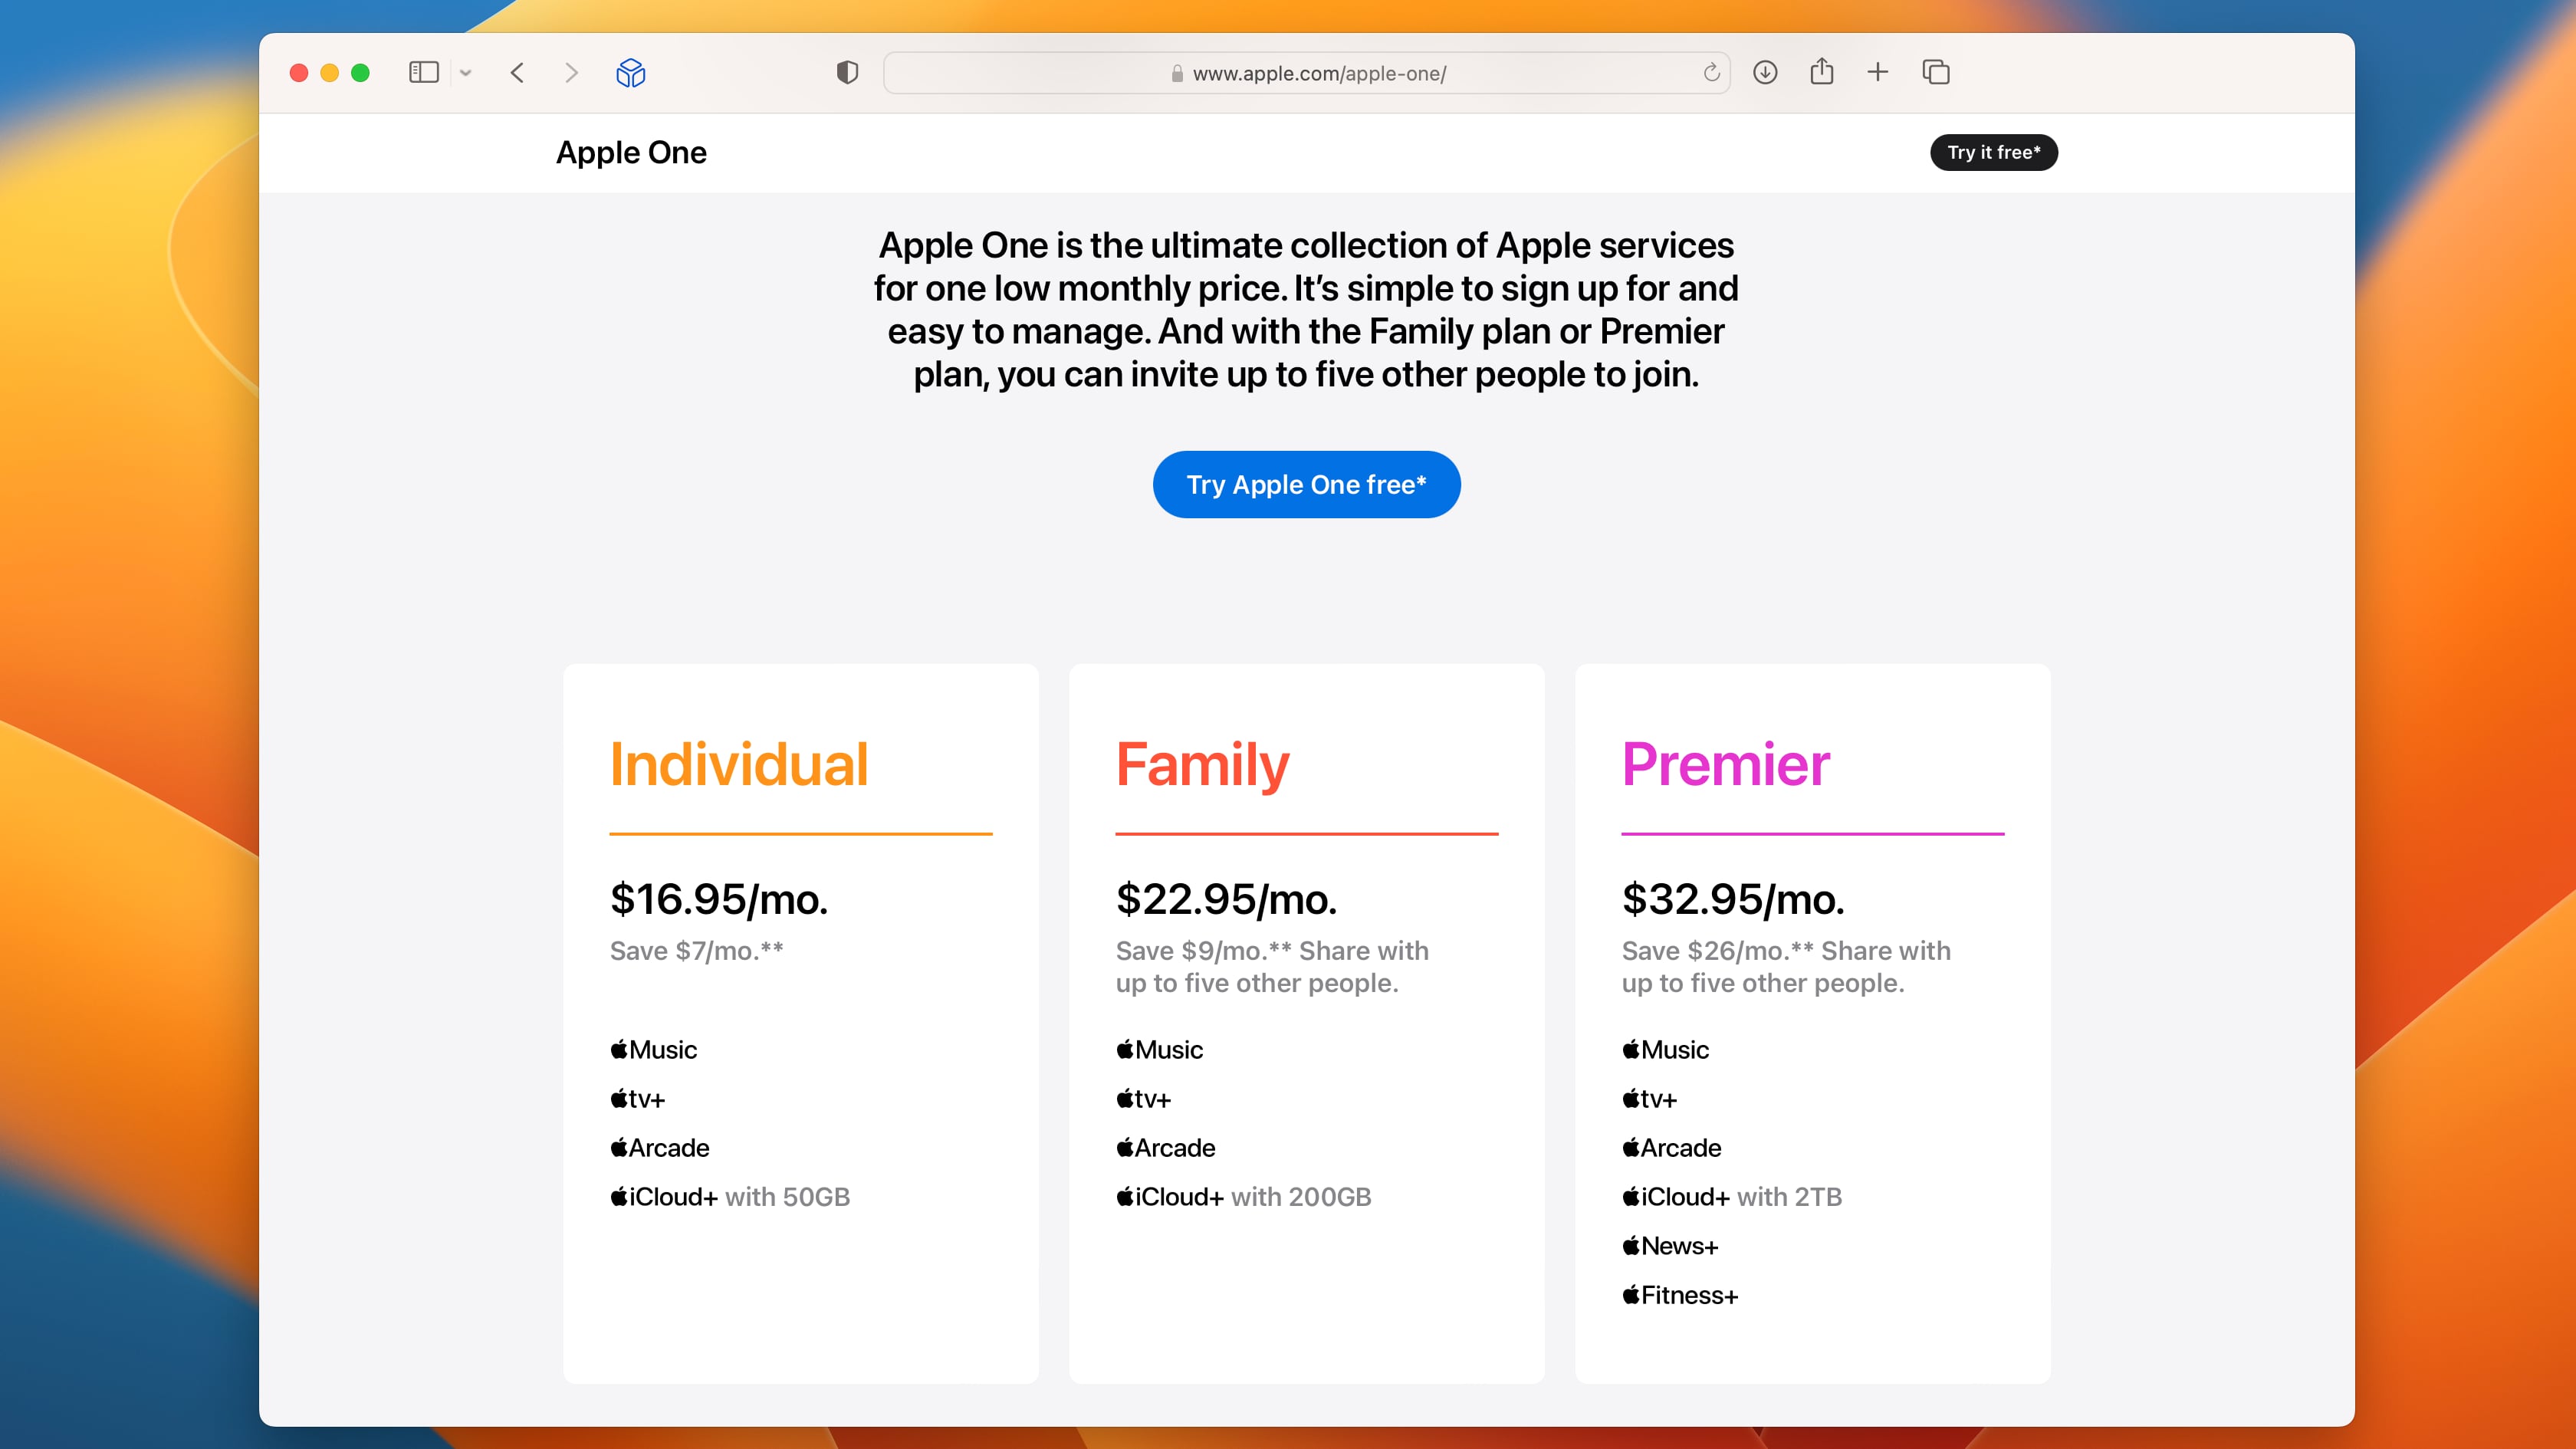 Safari screenshot showcasing the new price structure for the Apple One bundle tiers